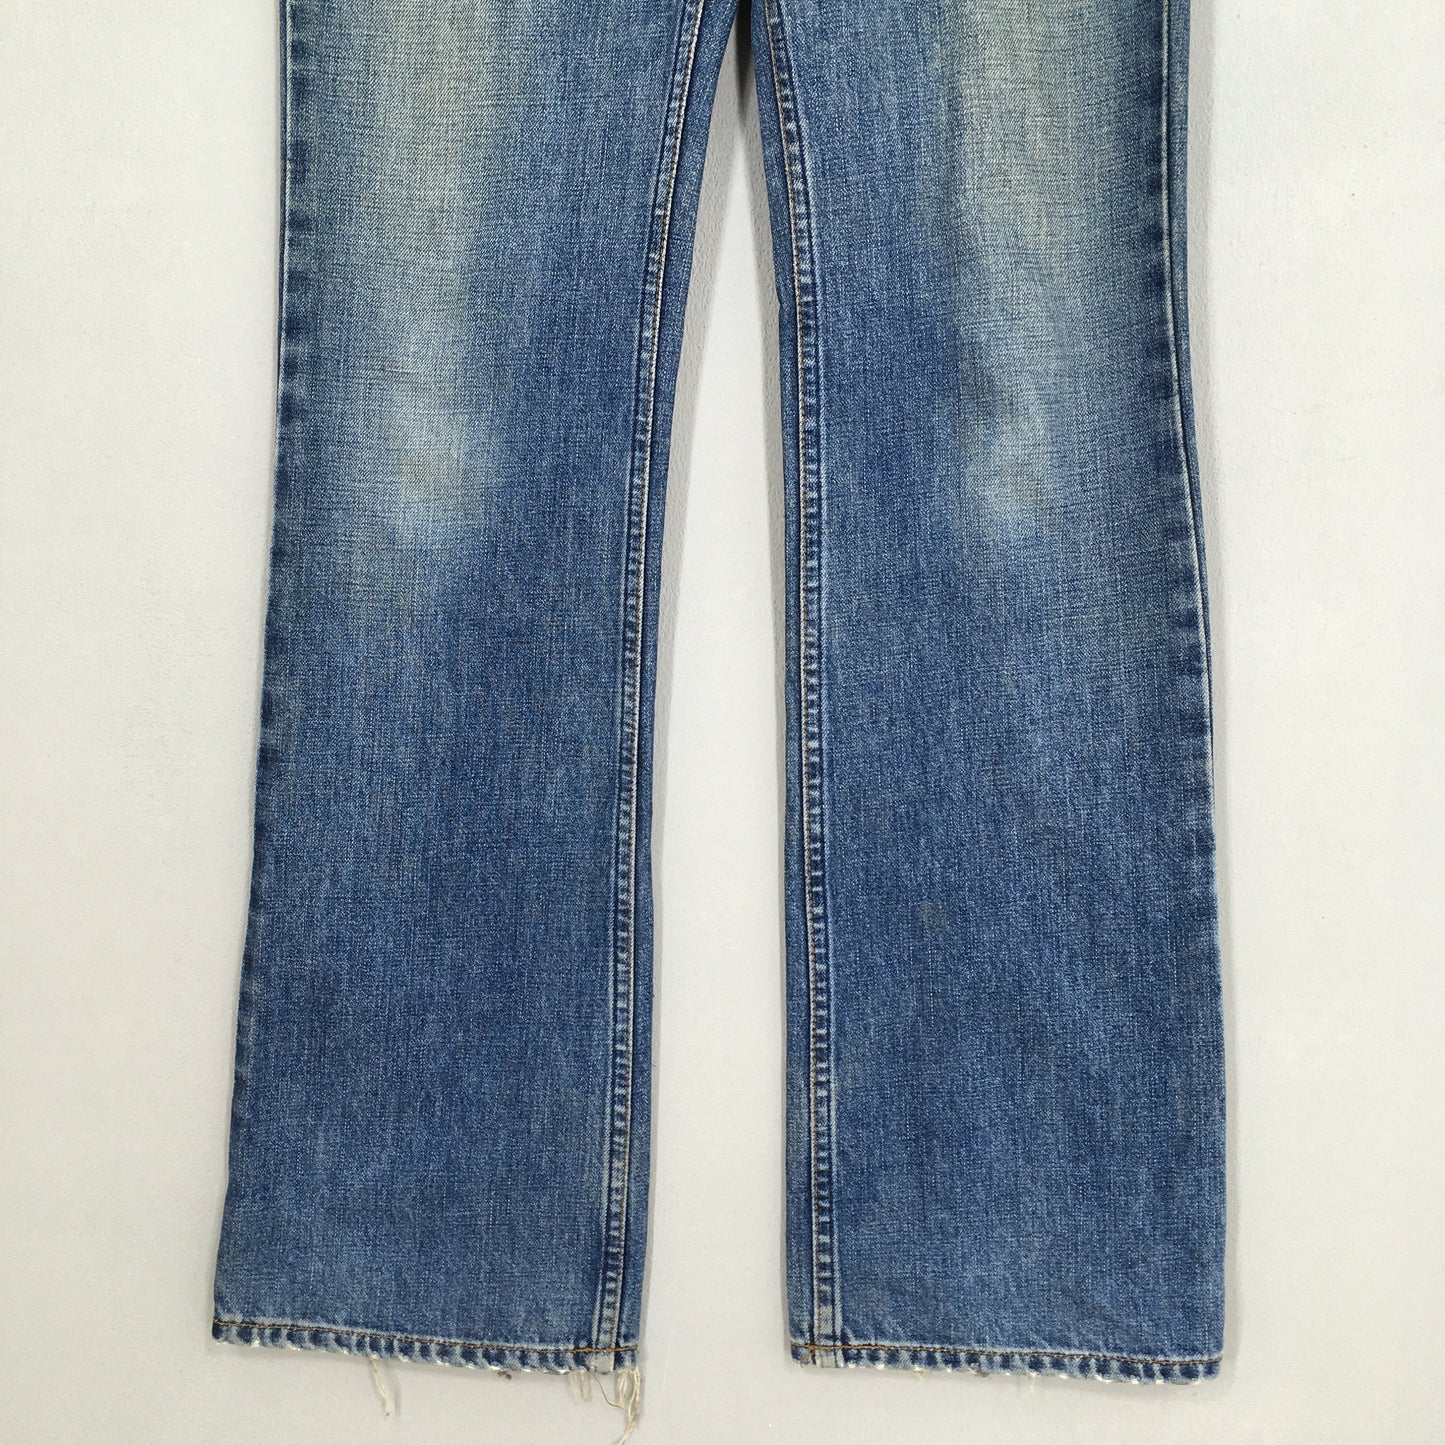 Levi's 517 Faded High Flare Bootcut Jeans Size 30x35